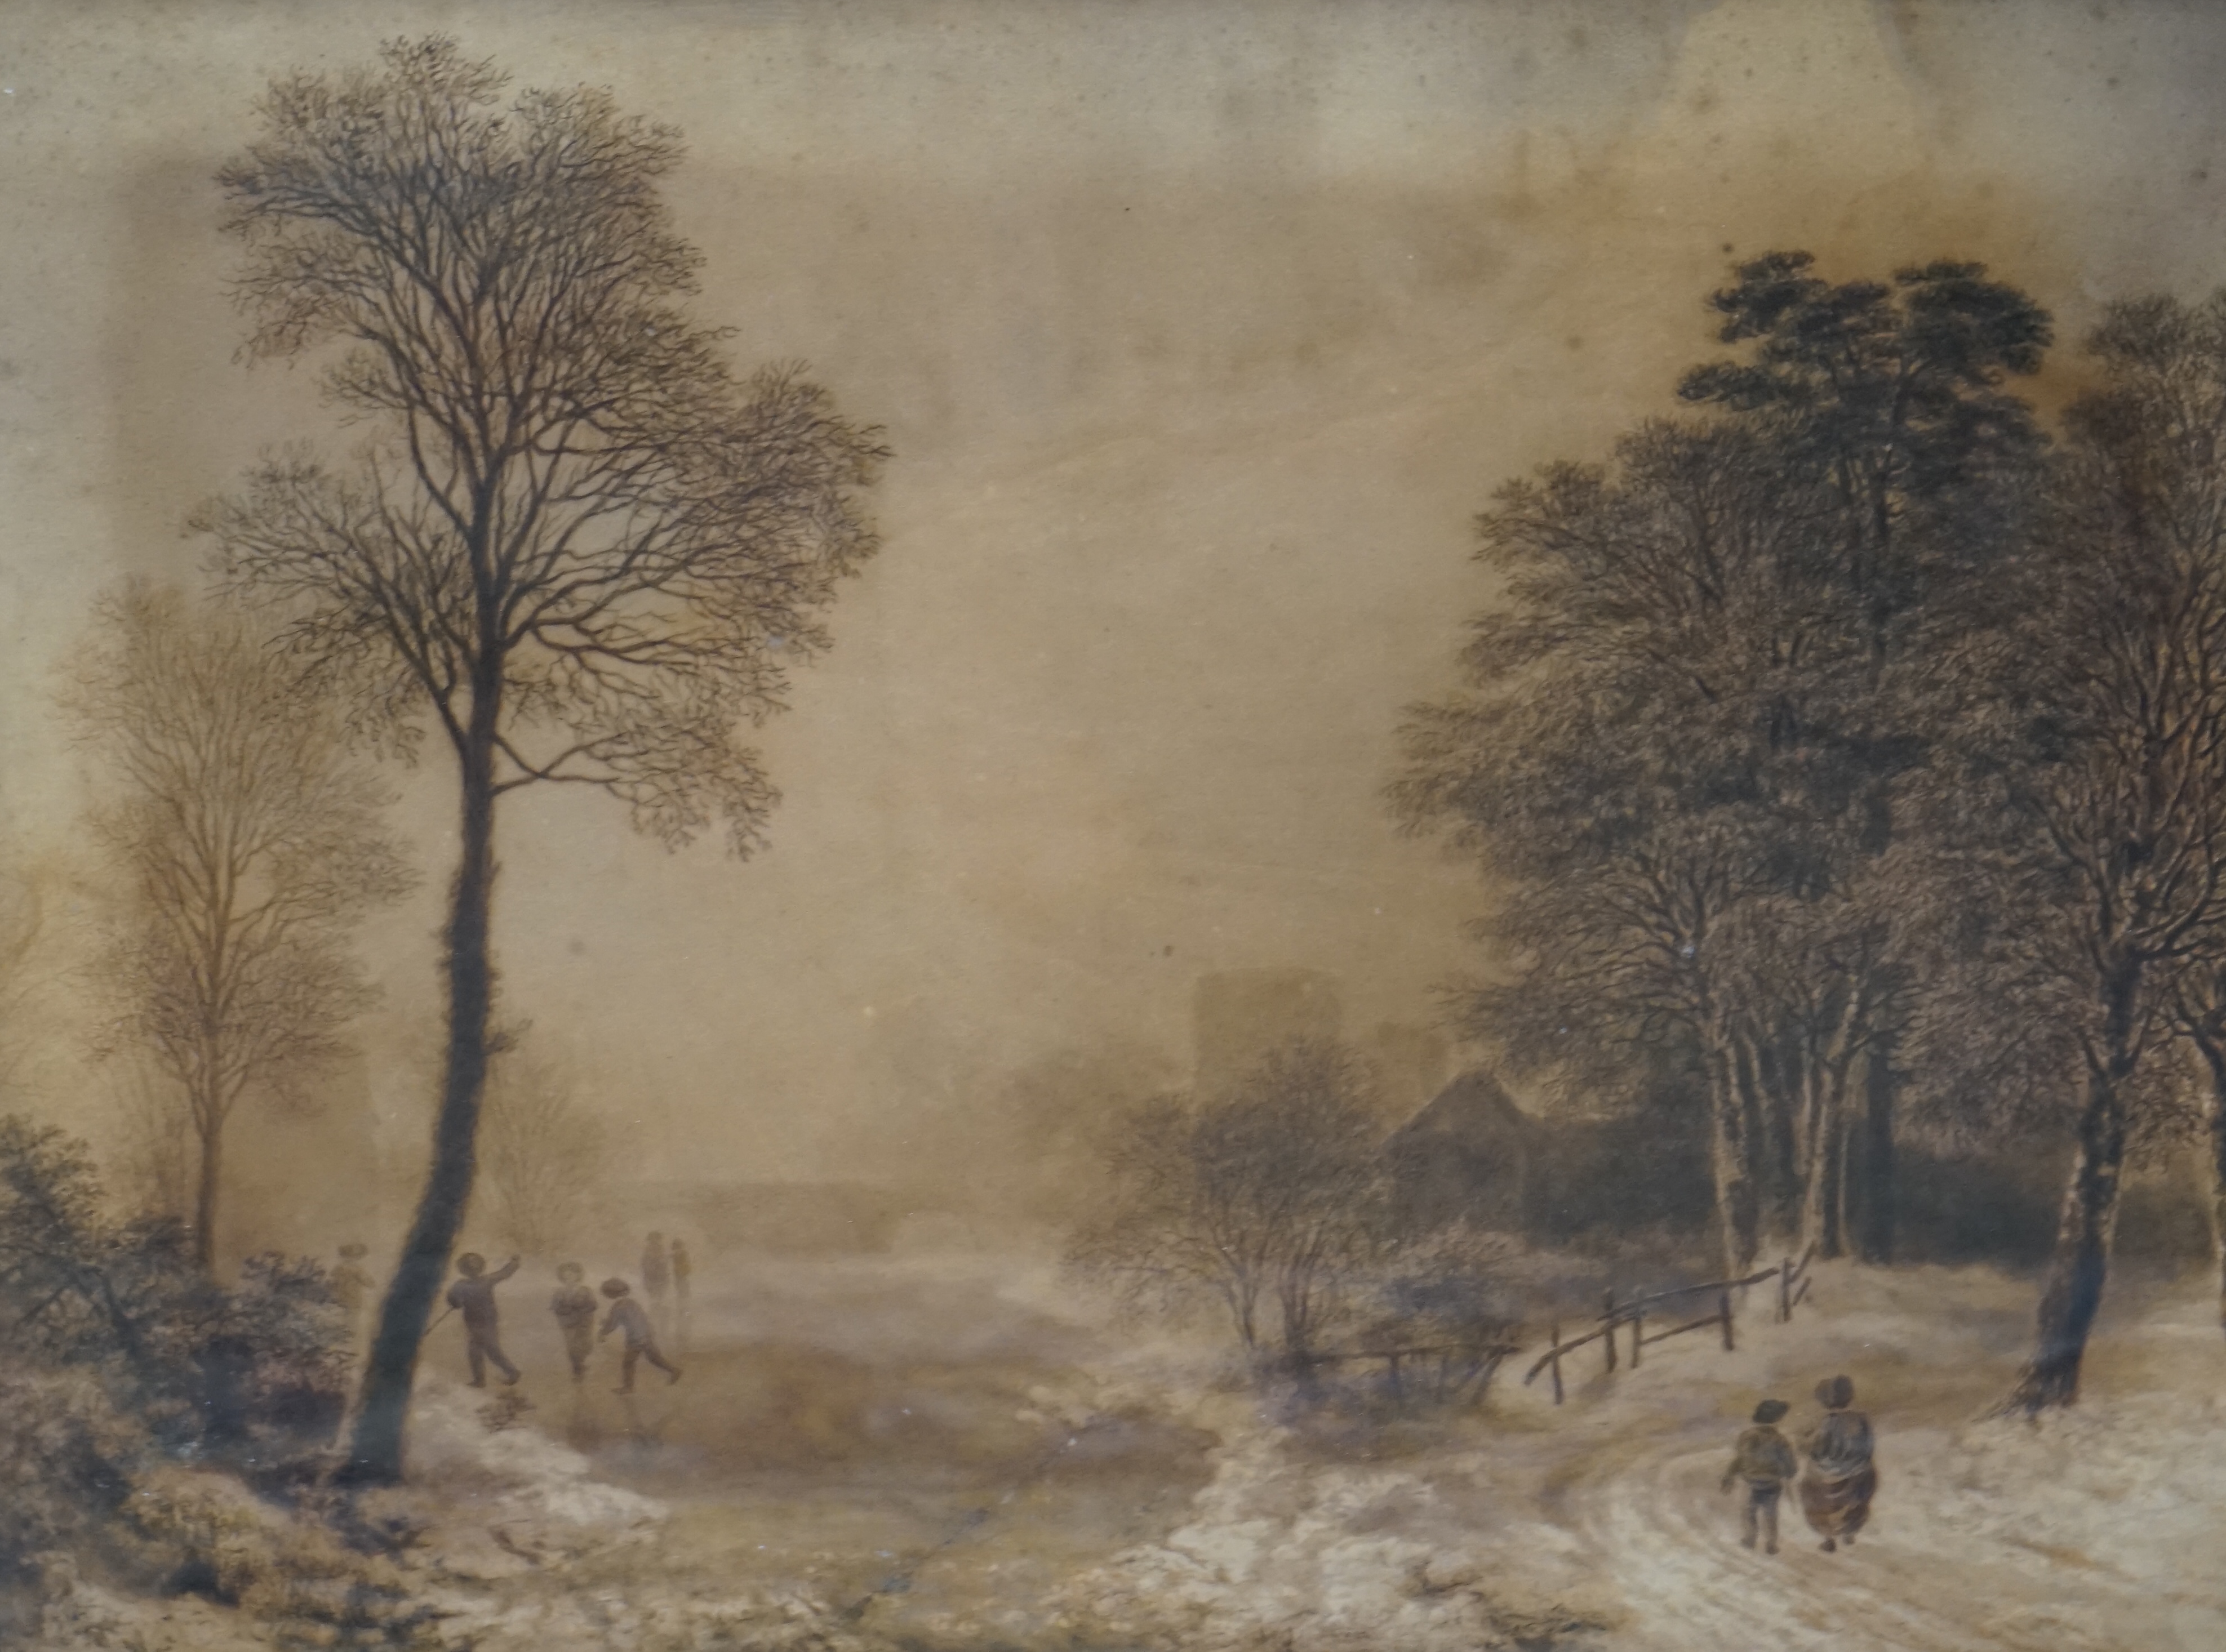 Attributed to Joshua Wallis (1789-1862), ink and wash, Winter scene with figures skating, inscribed Victoria and Albert Museum 464 FA verso, 33 x 44cm. Condition - poor to fair, discolouration